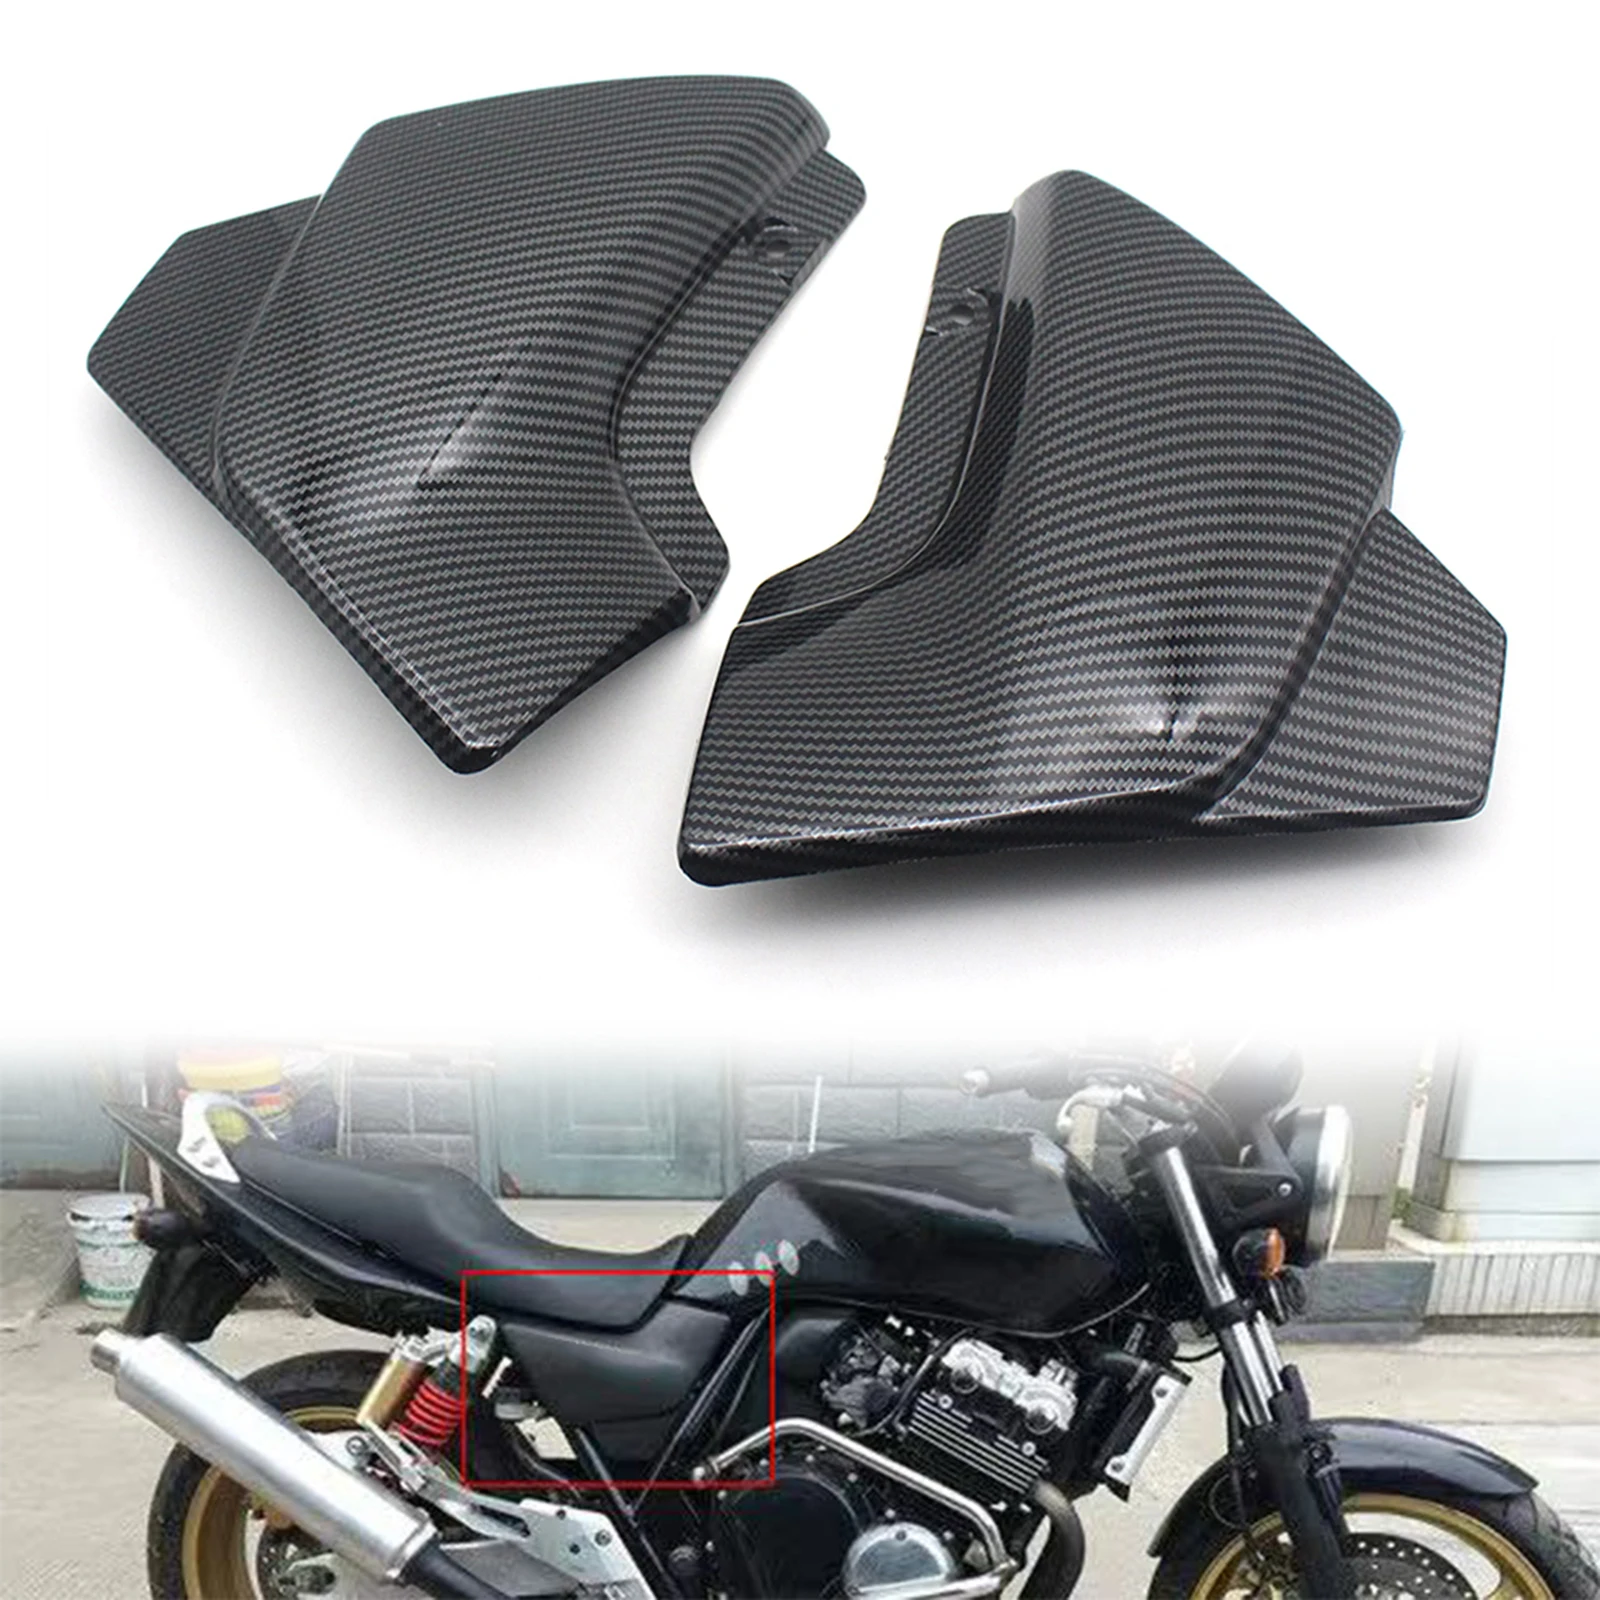 ABS Front Aerodynamic Paint Gloss Side Panel Guard Cover for Honda VTEC III SF Fairing Body Cowl Trim Motorcycle Accessories